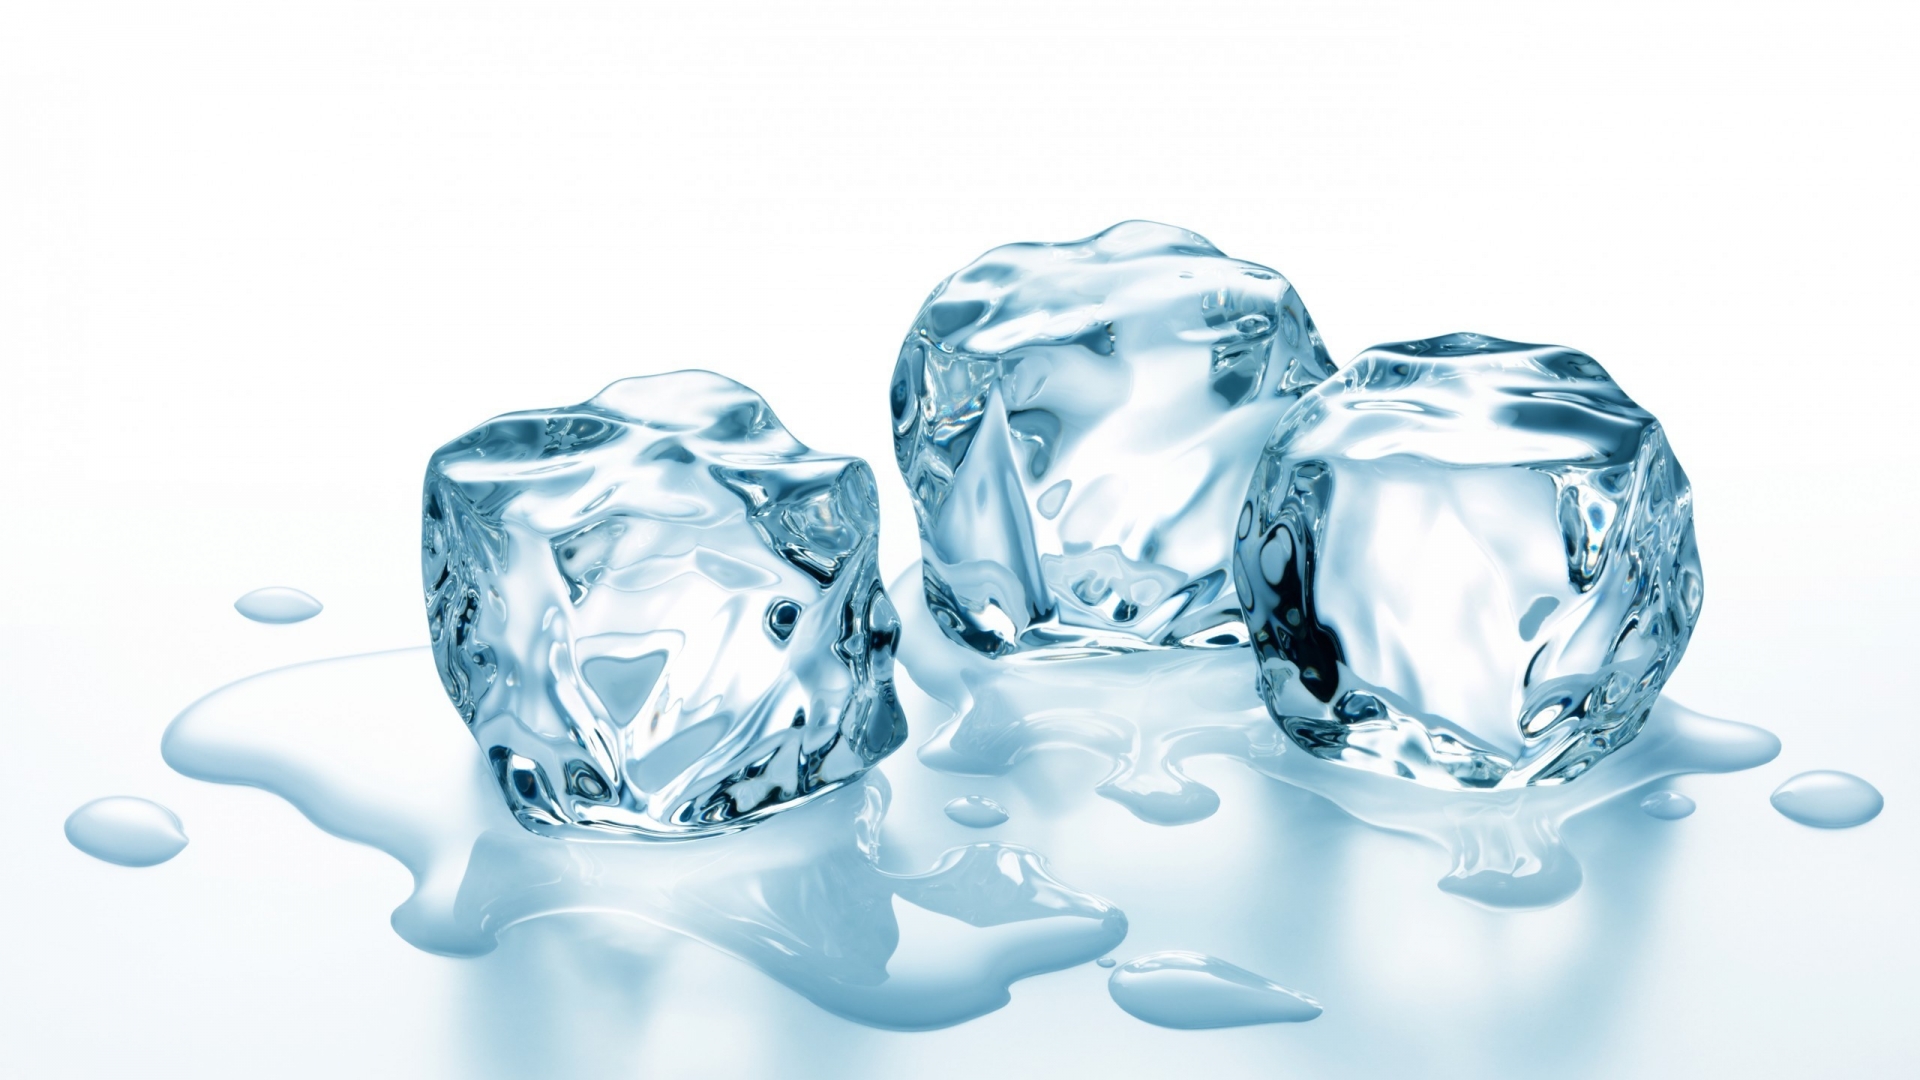 Ice Cubes for 1920 x 1080 HDTV 1080p resolution